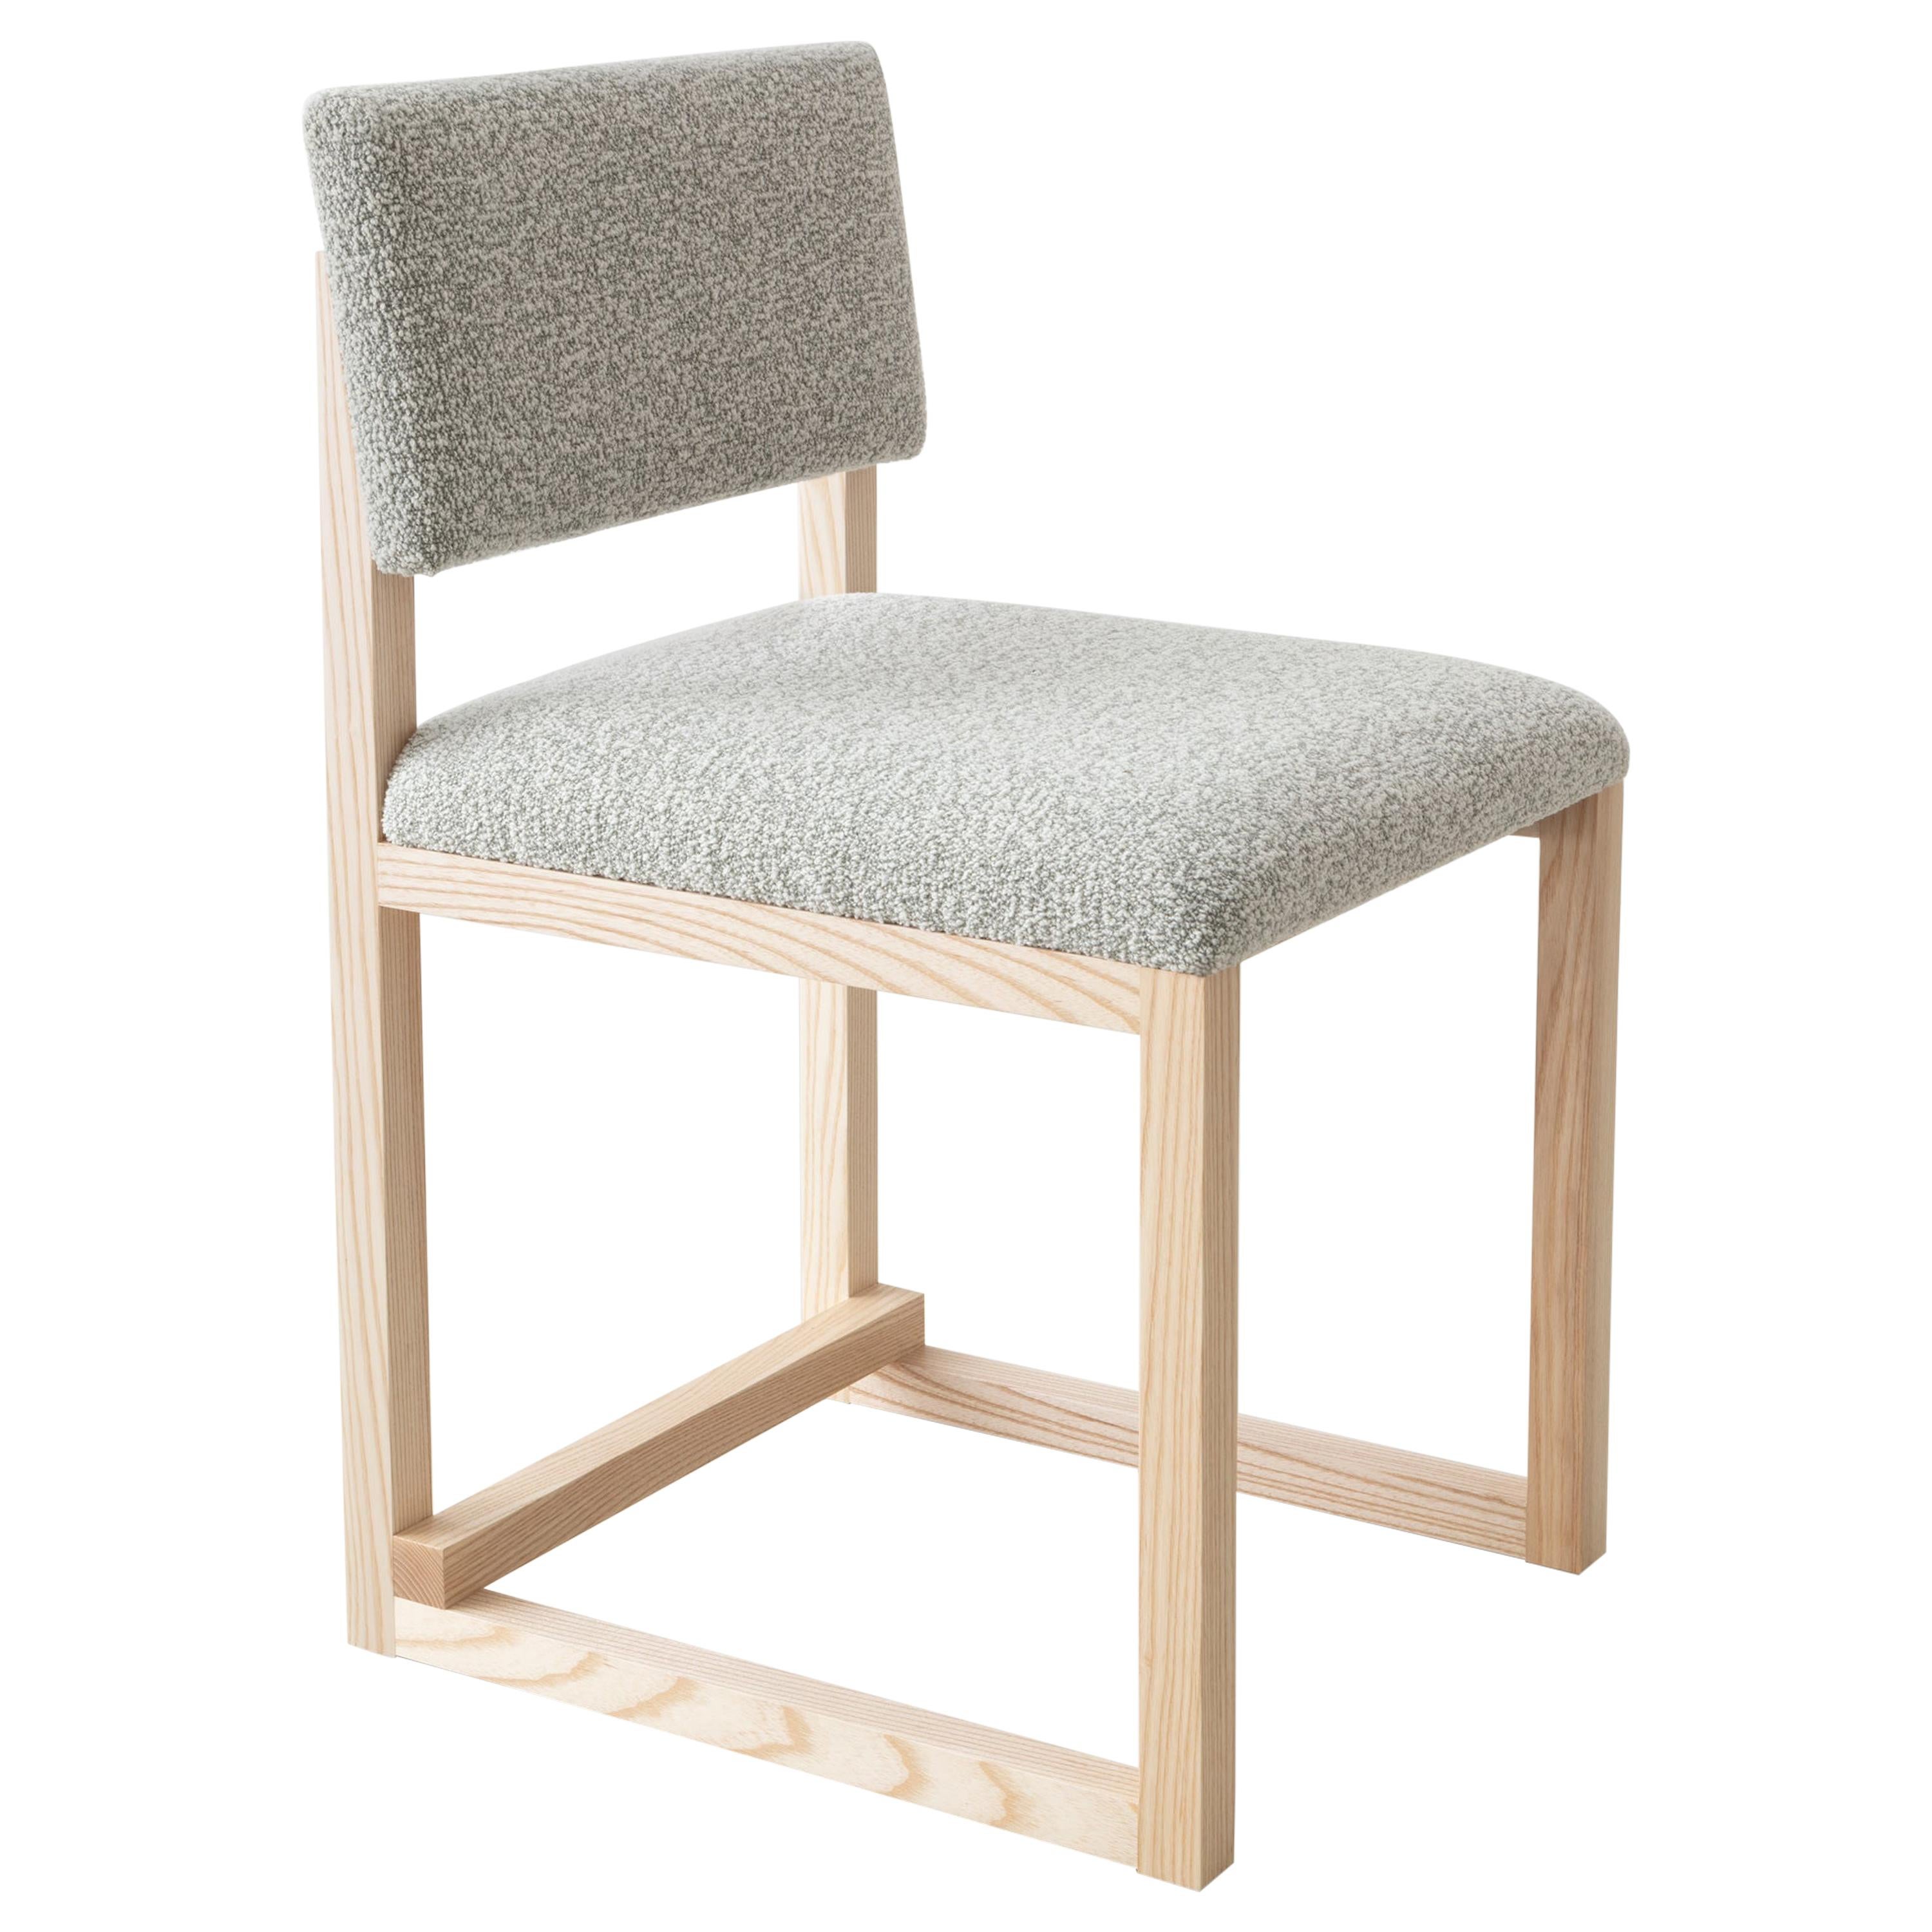 SQ Upholstered Dining Chair, Solid Wood, Bouclé or COM COL, Handmade in USA